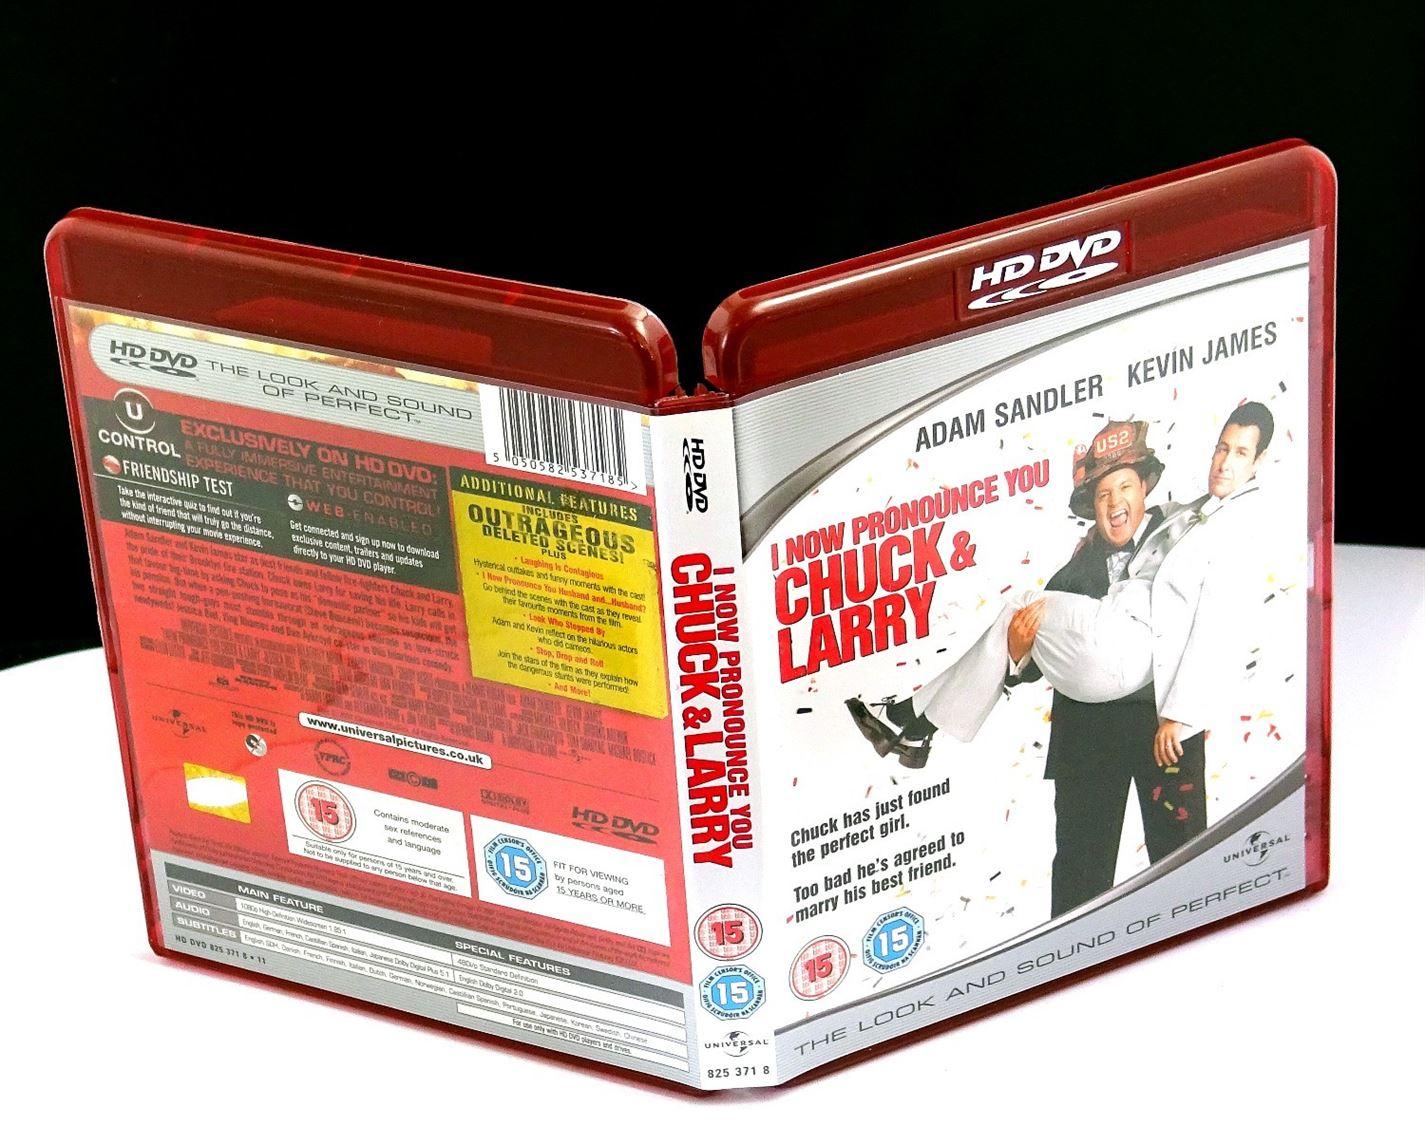 I Now Pronounce you Chuck & Larry (HD DVD) - UK Seller